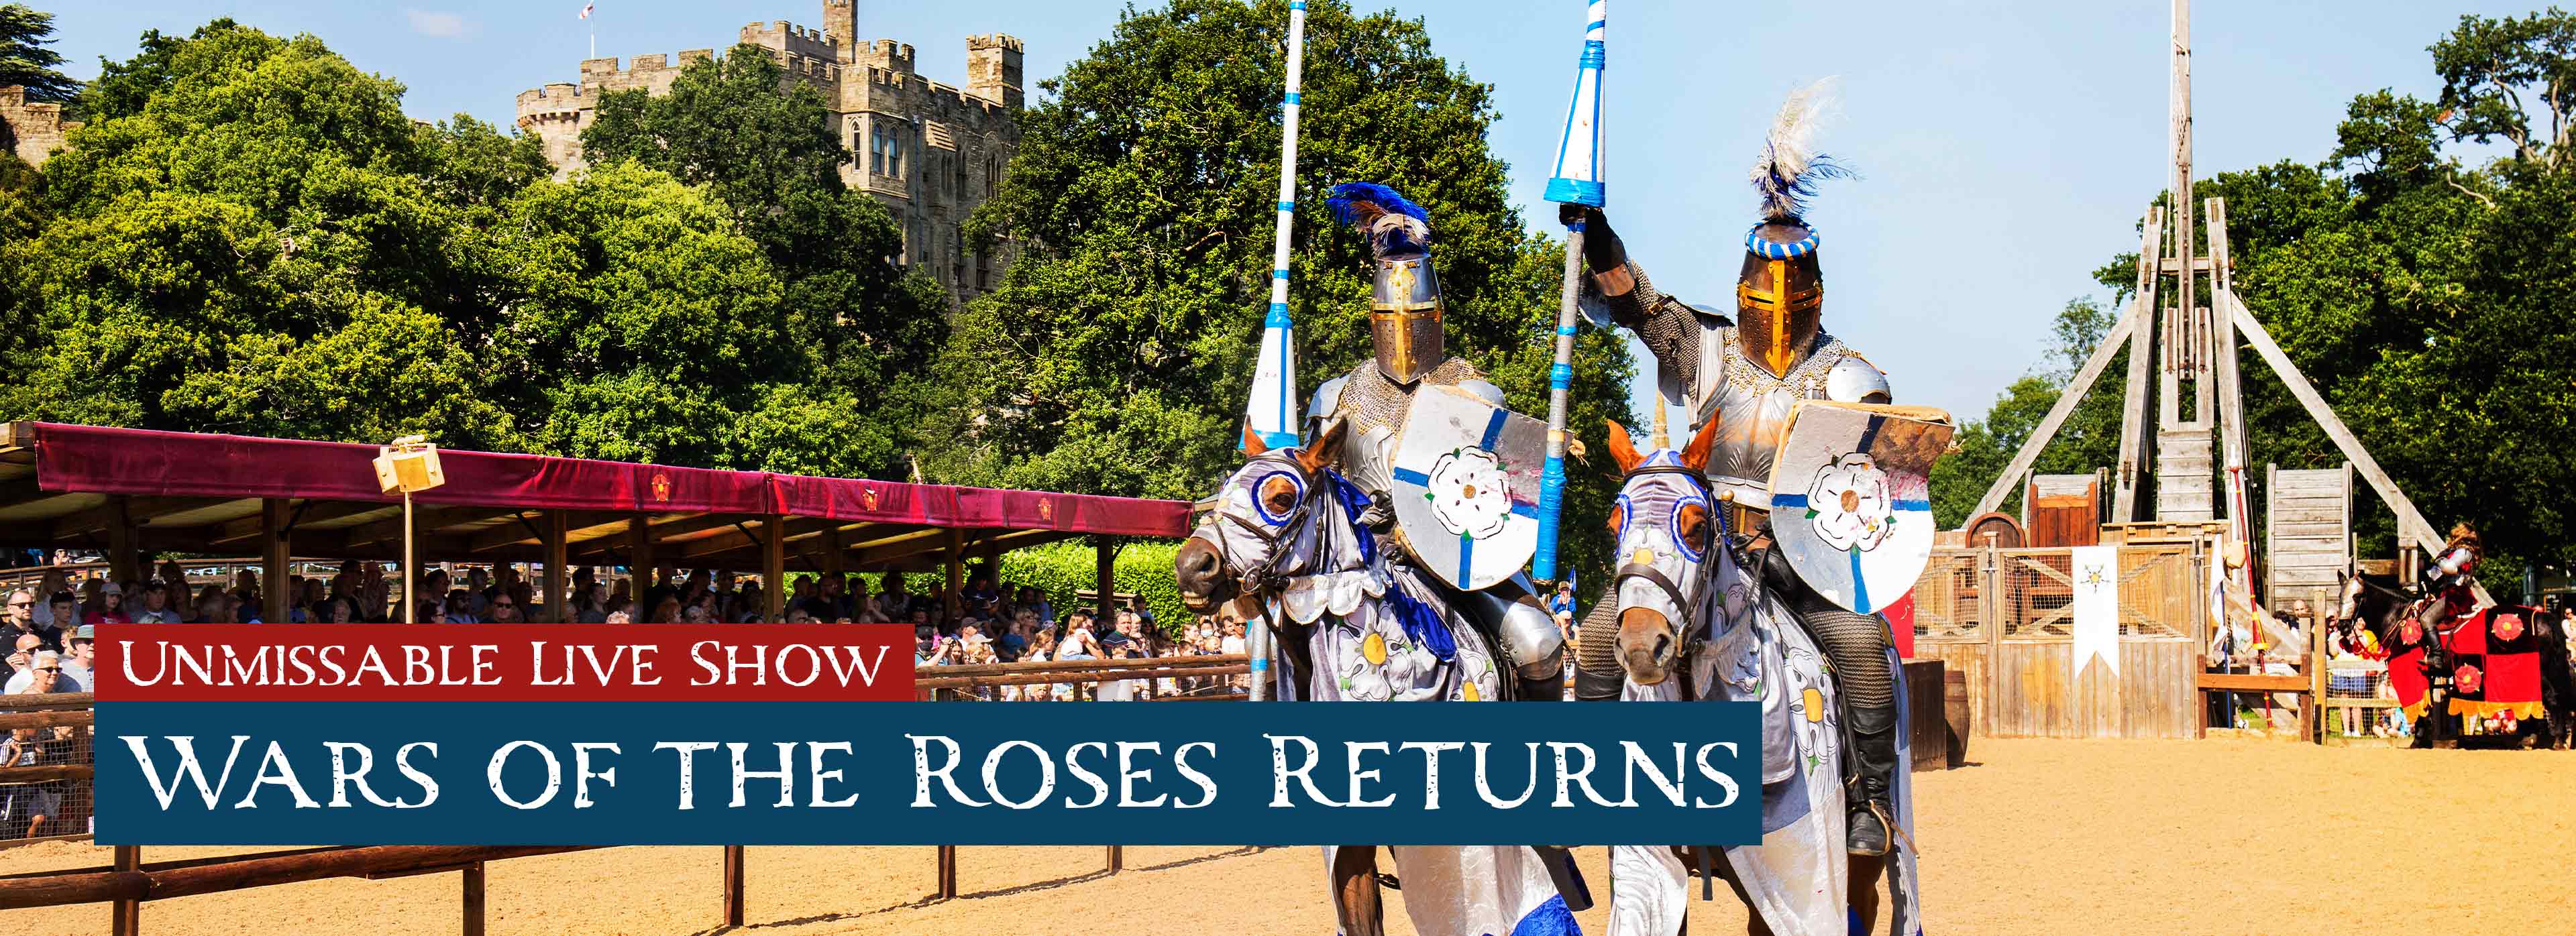 Wars of The Roses show at Warwick Castle